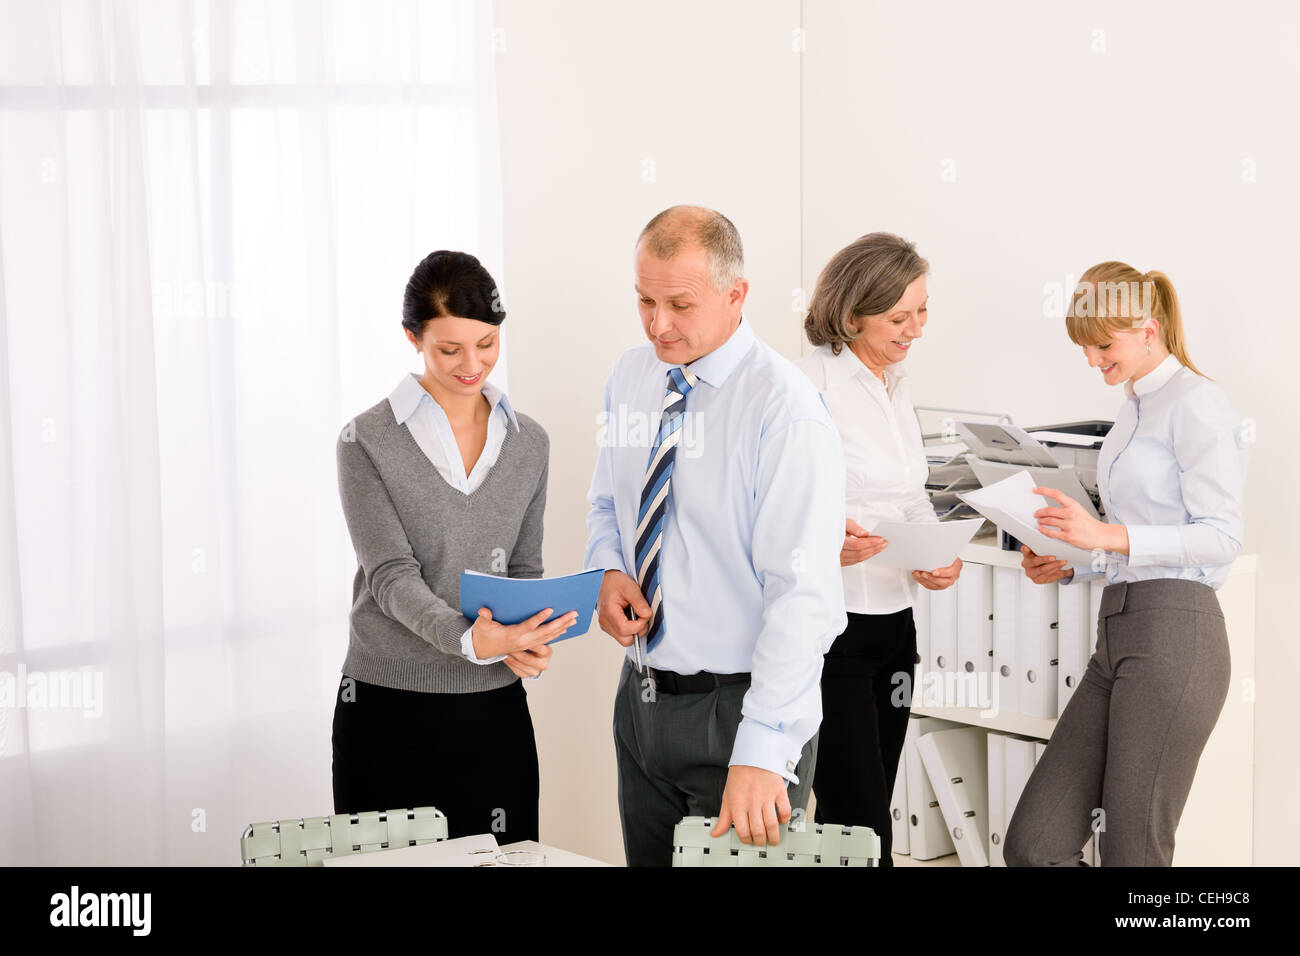 Sales meeting business people review reports consulting new strategy Stock Photo